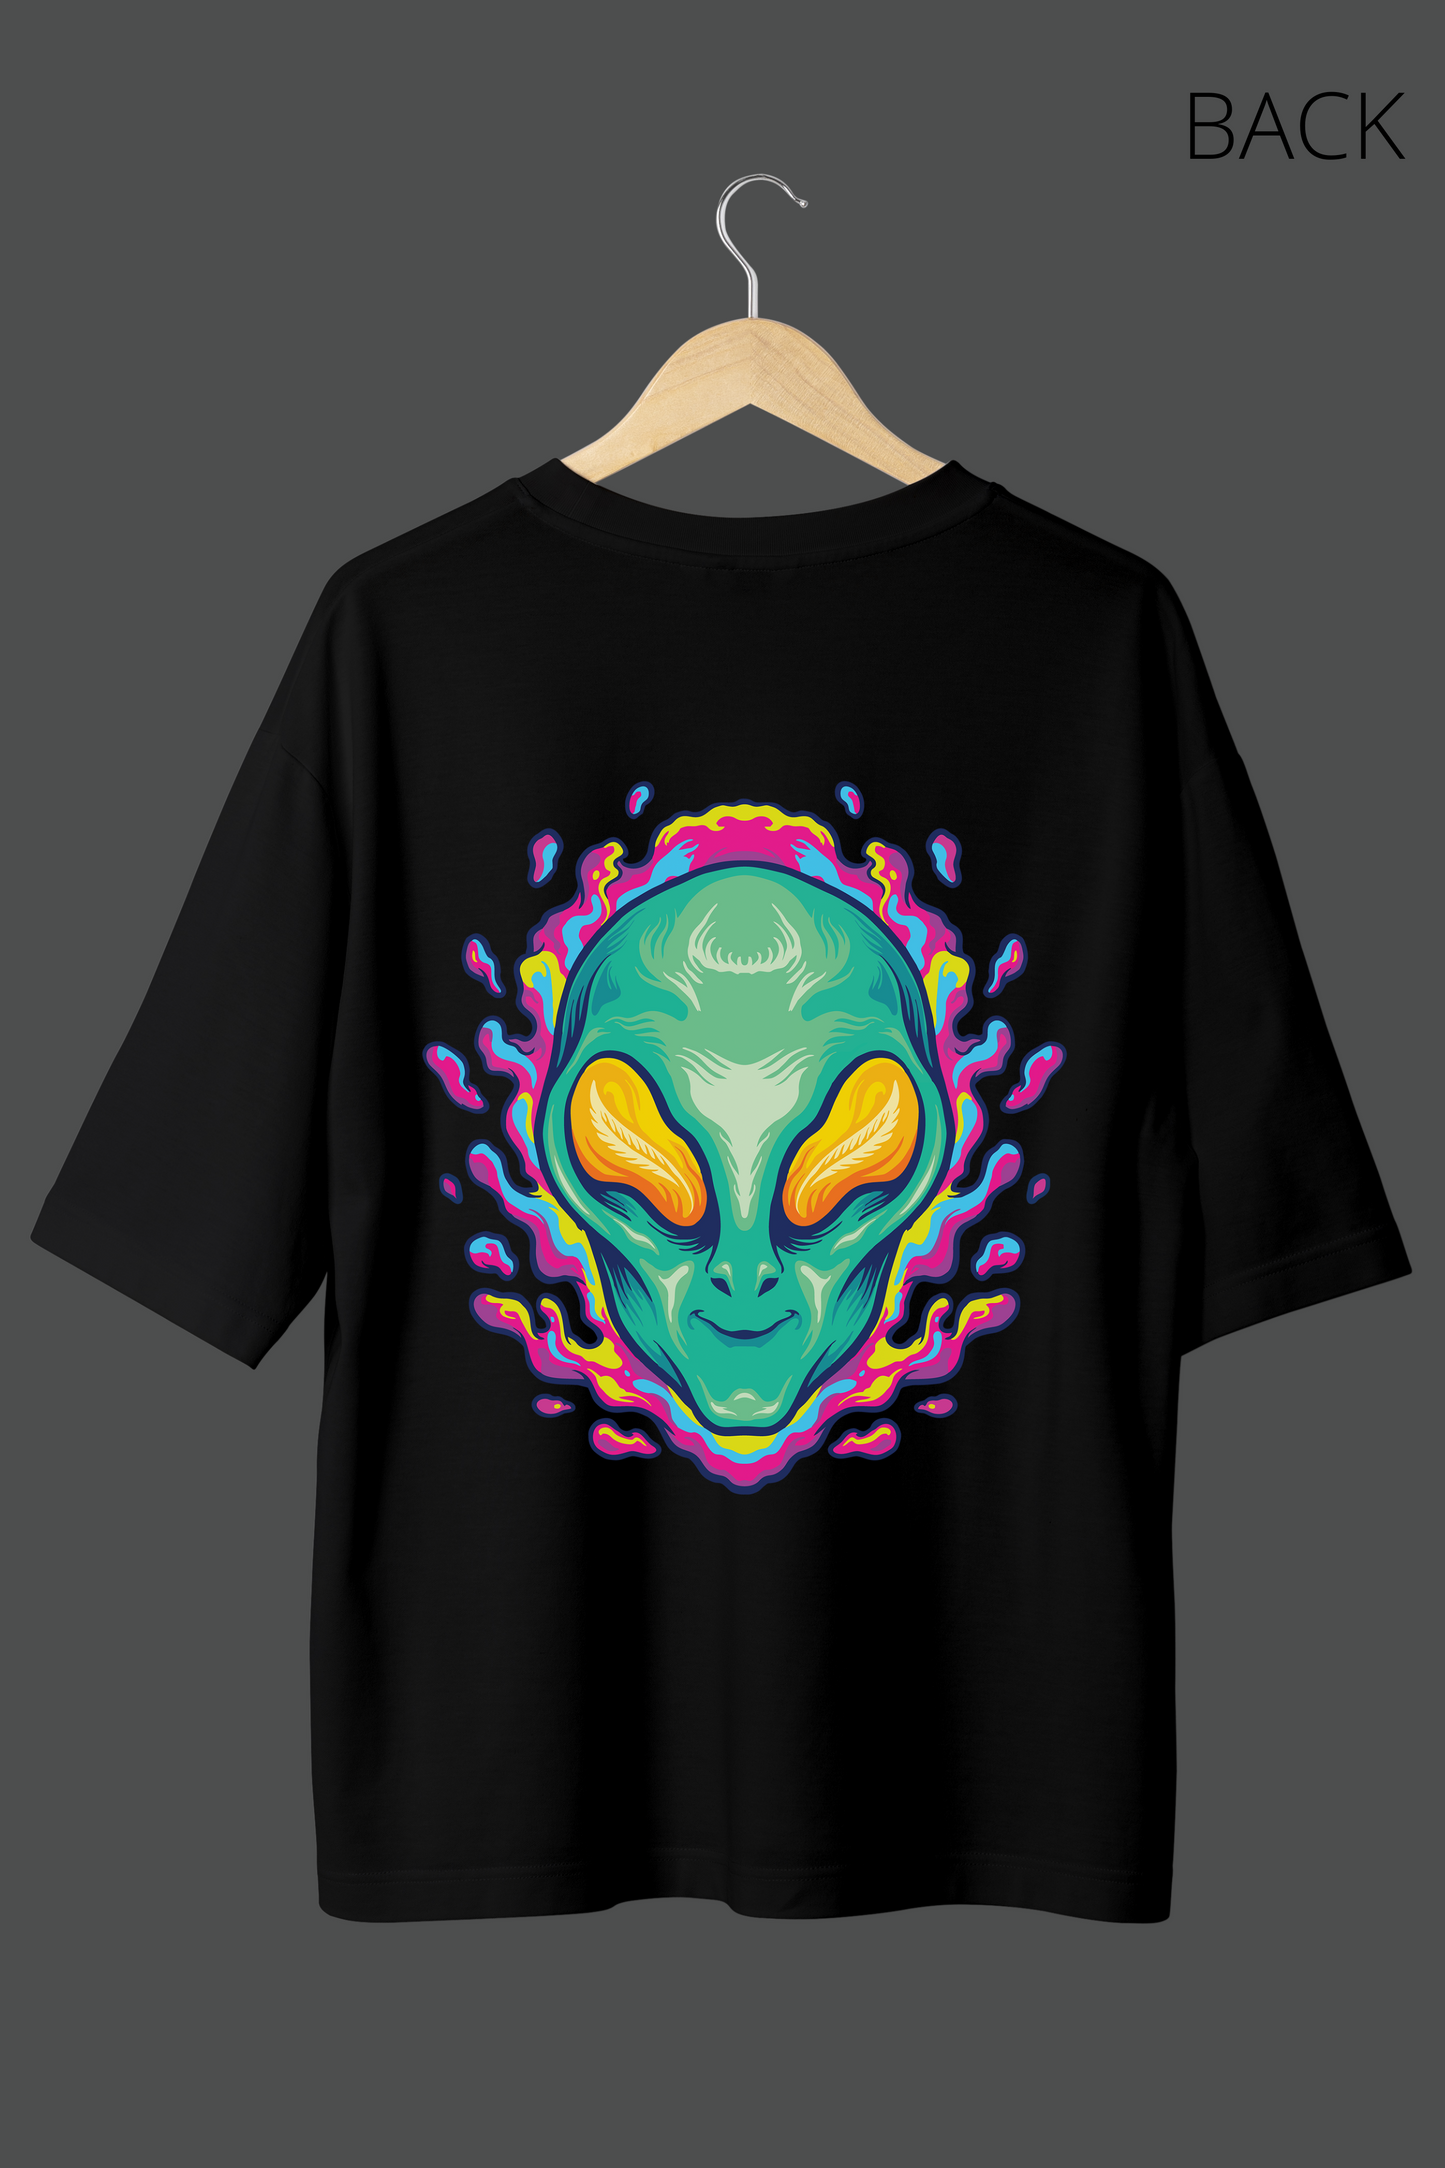 Mad Alien (available in 4 colors)